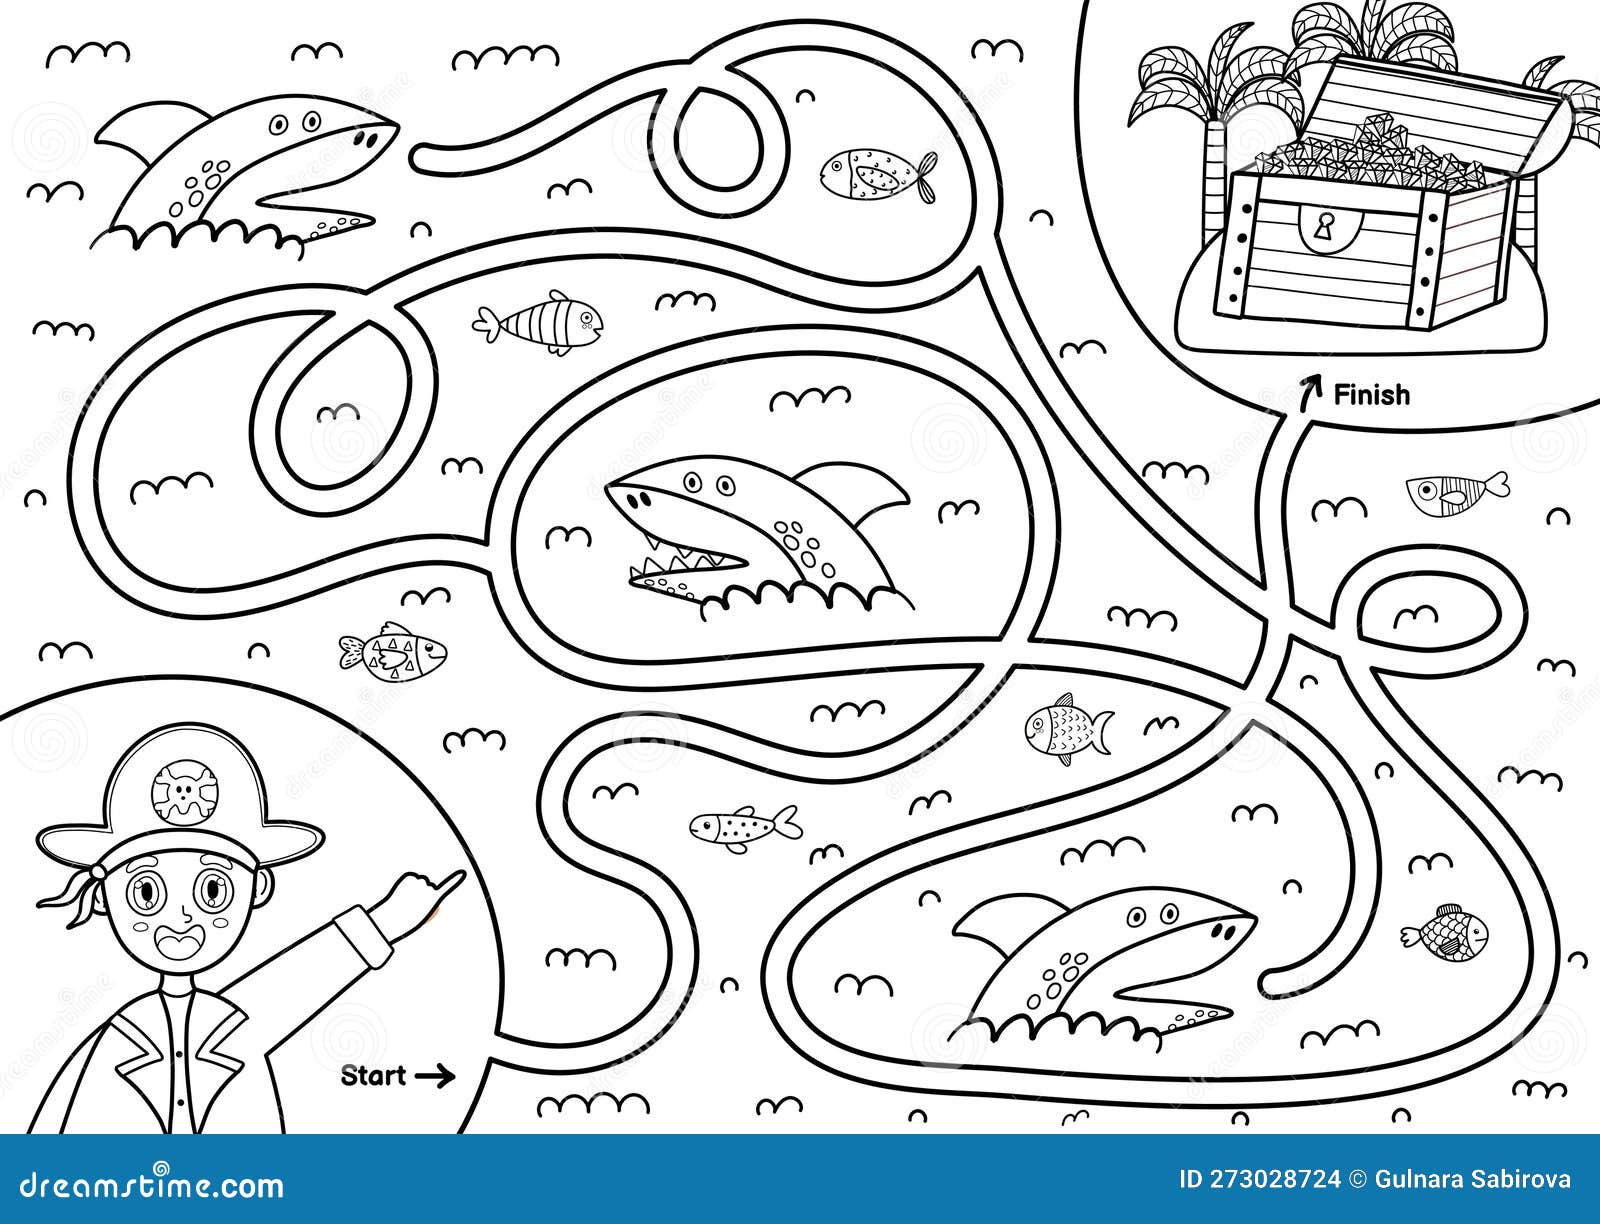 Black and White Maze Game for Kids. Help the Pirate Find the Way To the ...